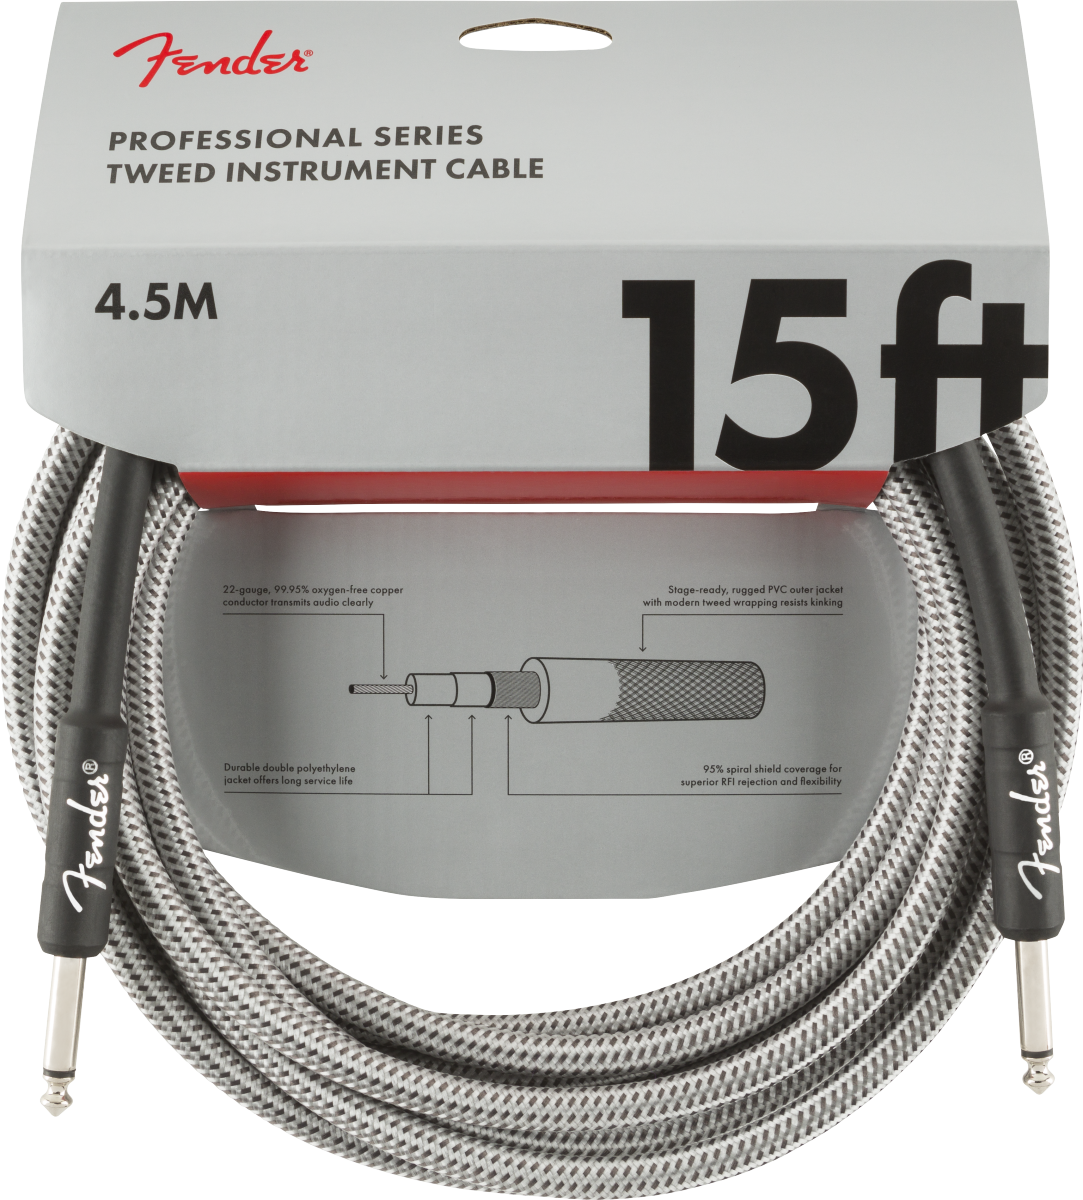 Fender Professional Series Tweed Instrument Cable 15FT - Straight to Straight - White Tweed